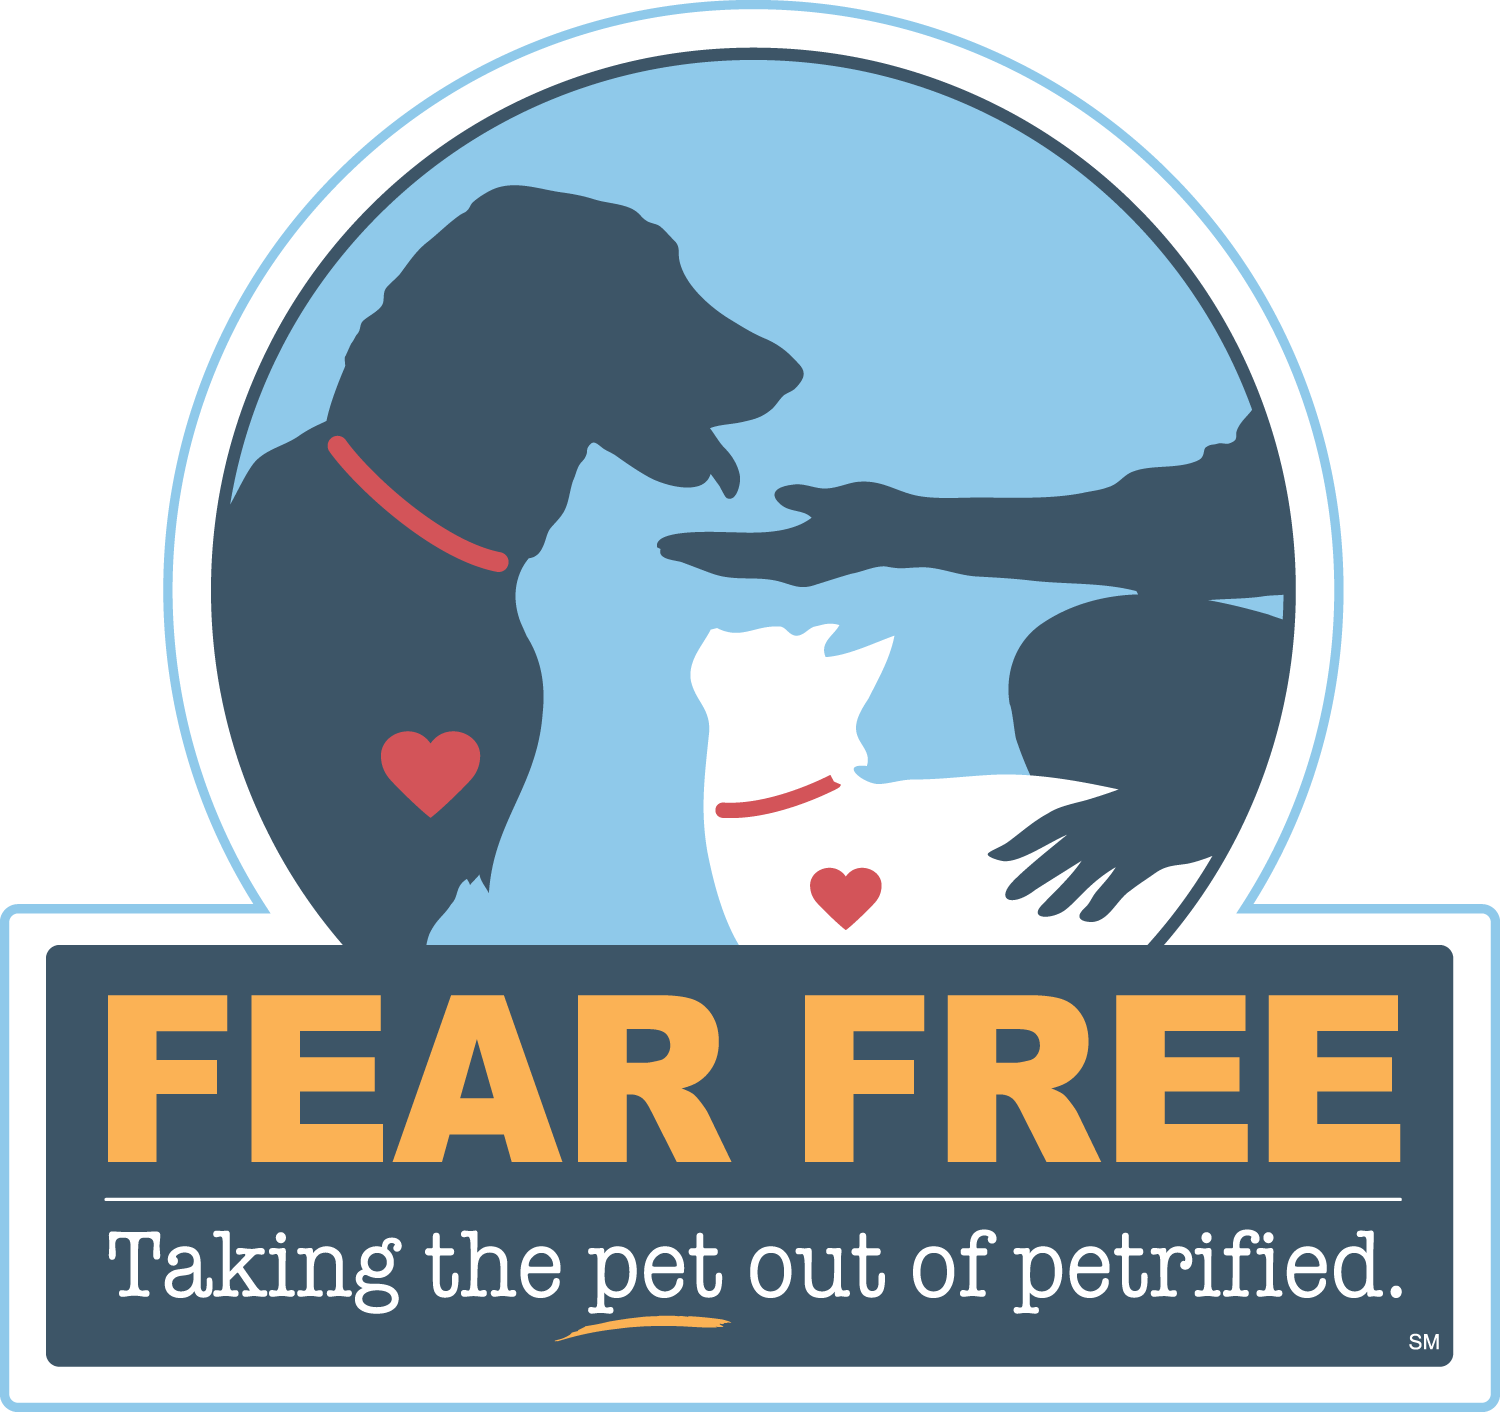 Treatwell Pet Care Mobile Veterinary Services of Ottawa - Fear Free